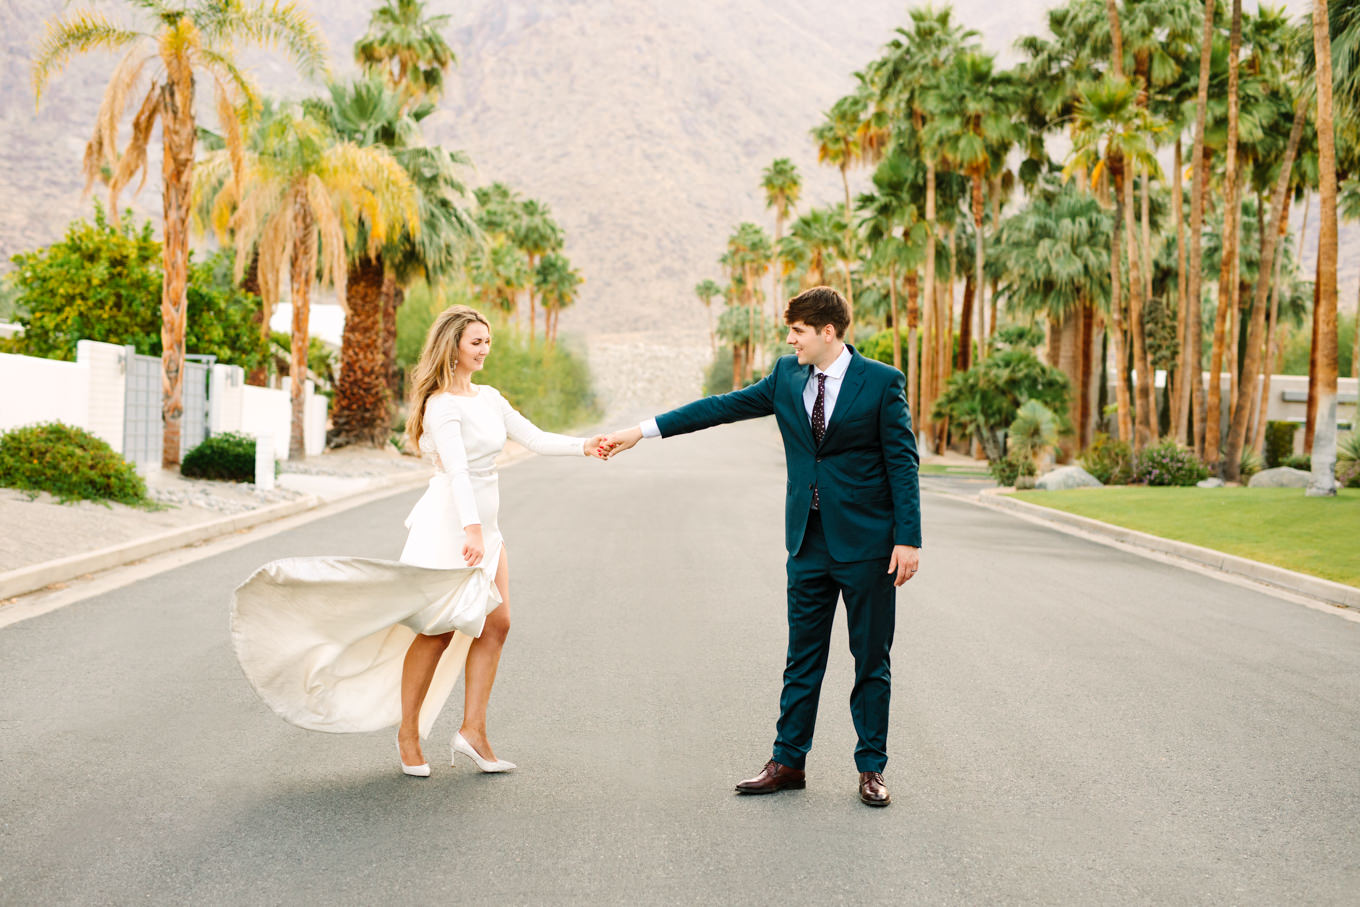 Bride and groom walking in the street | Colorful jewel tone Palm Springs elopement | Fresh and colorful photography for fun-loving couples in Southern California | #colorfulelopement #palmspringselopement #elopementphotography #palmspringswedding Source: Mary Costa Photography | Los Angeles